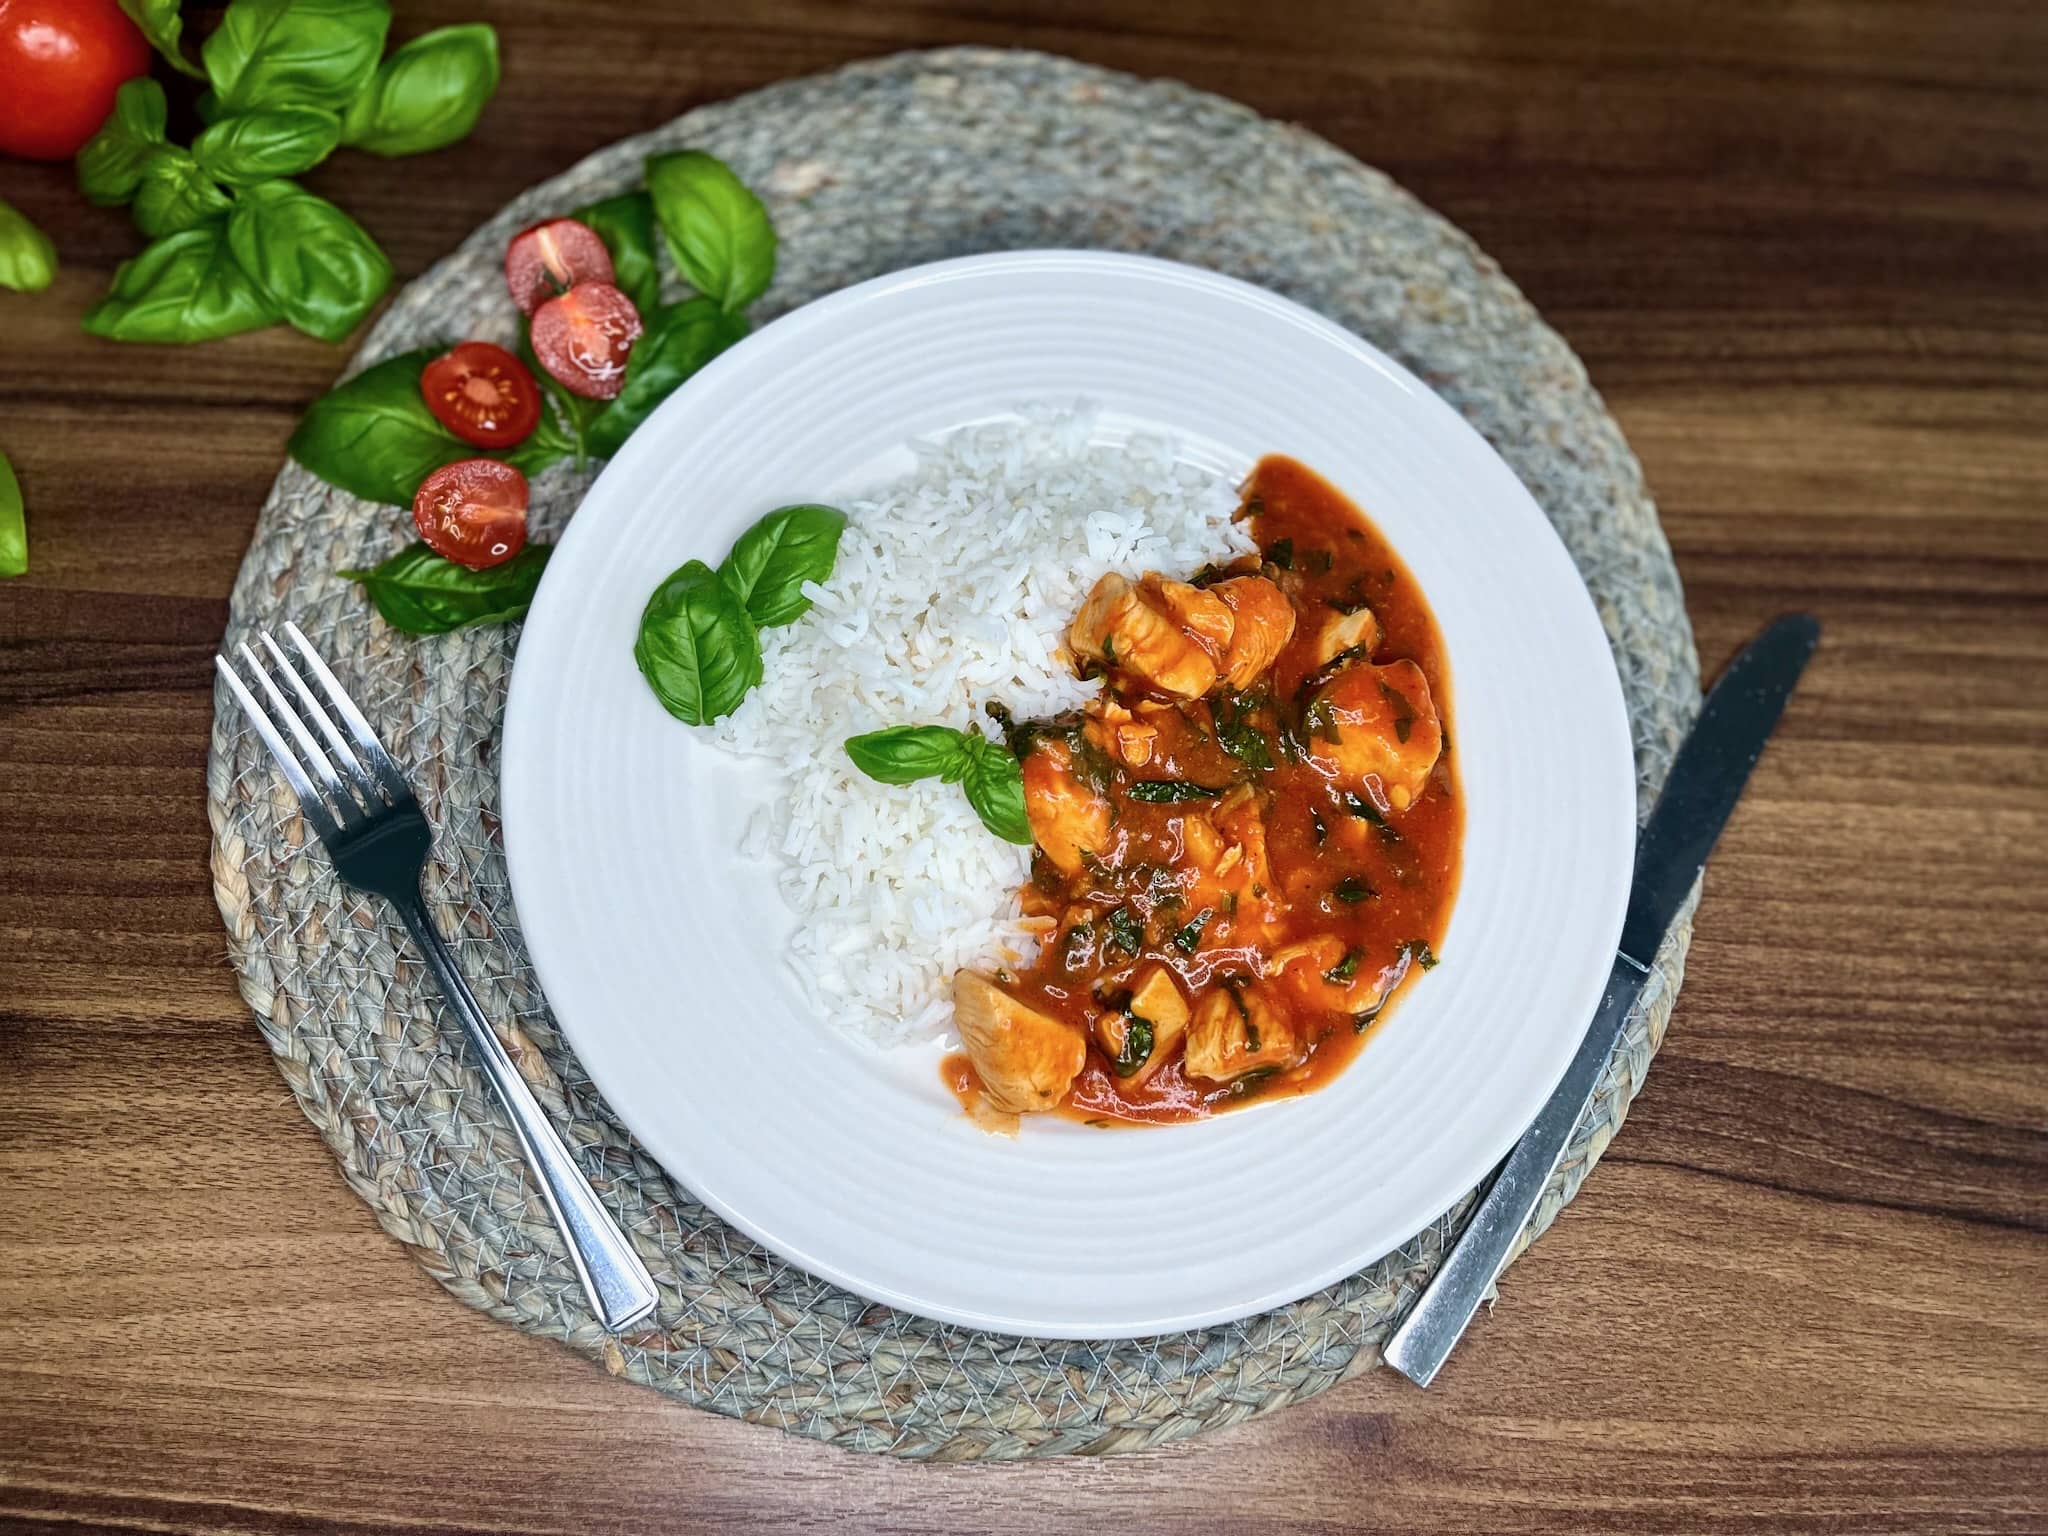 Tomato and Basil Chicken is beautifully served with rice on a plate